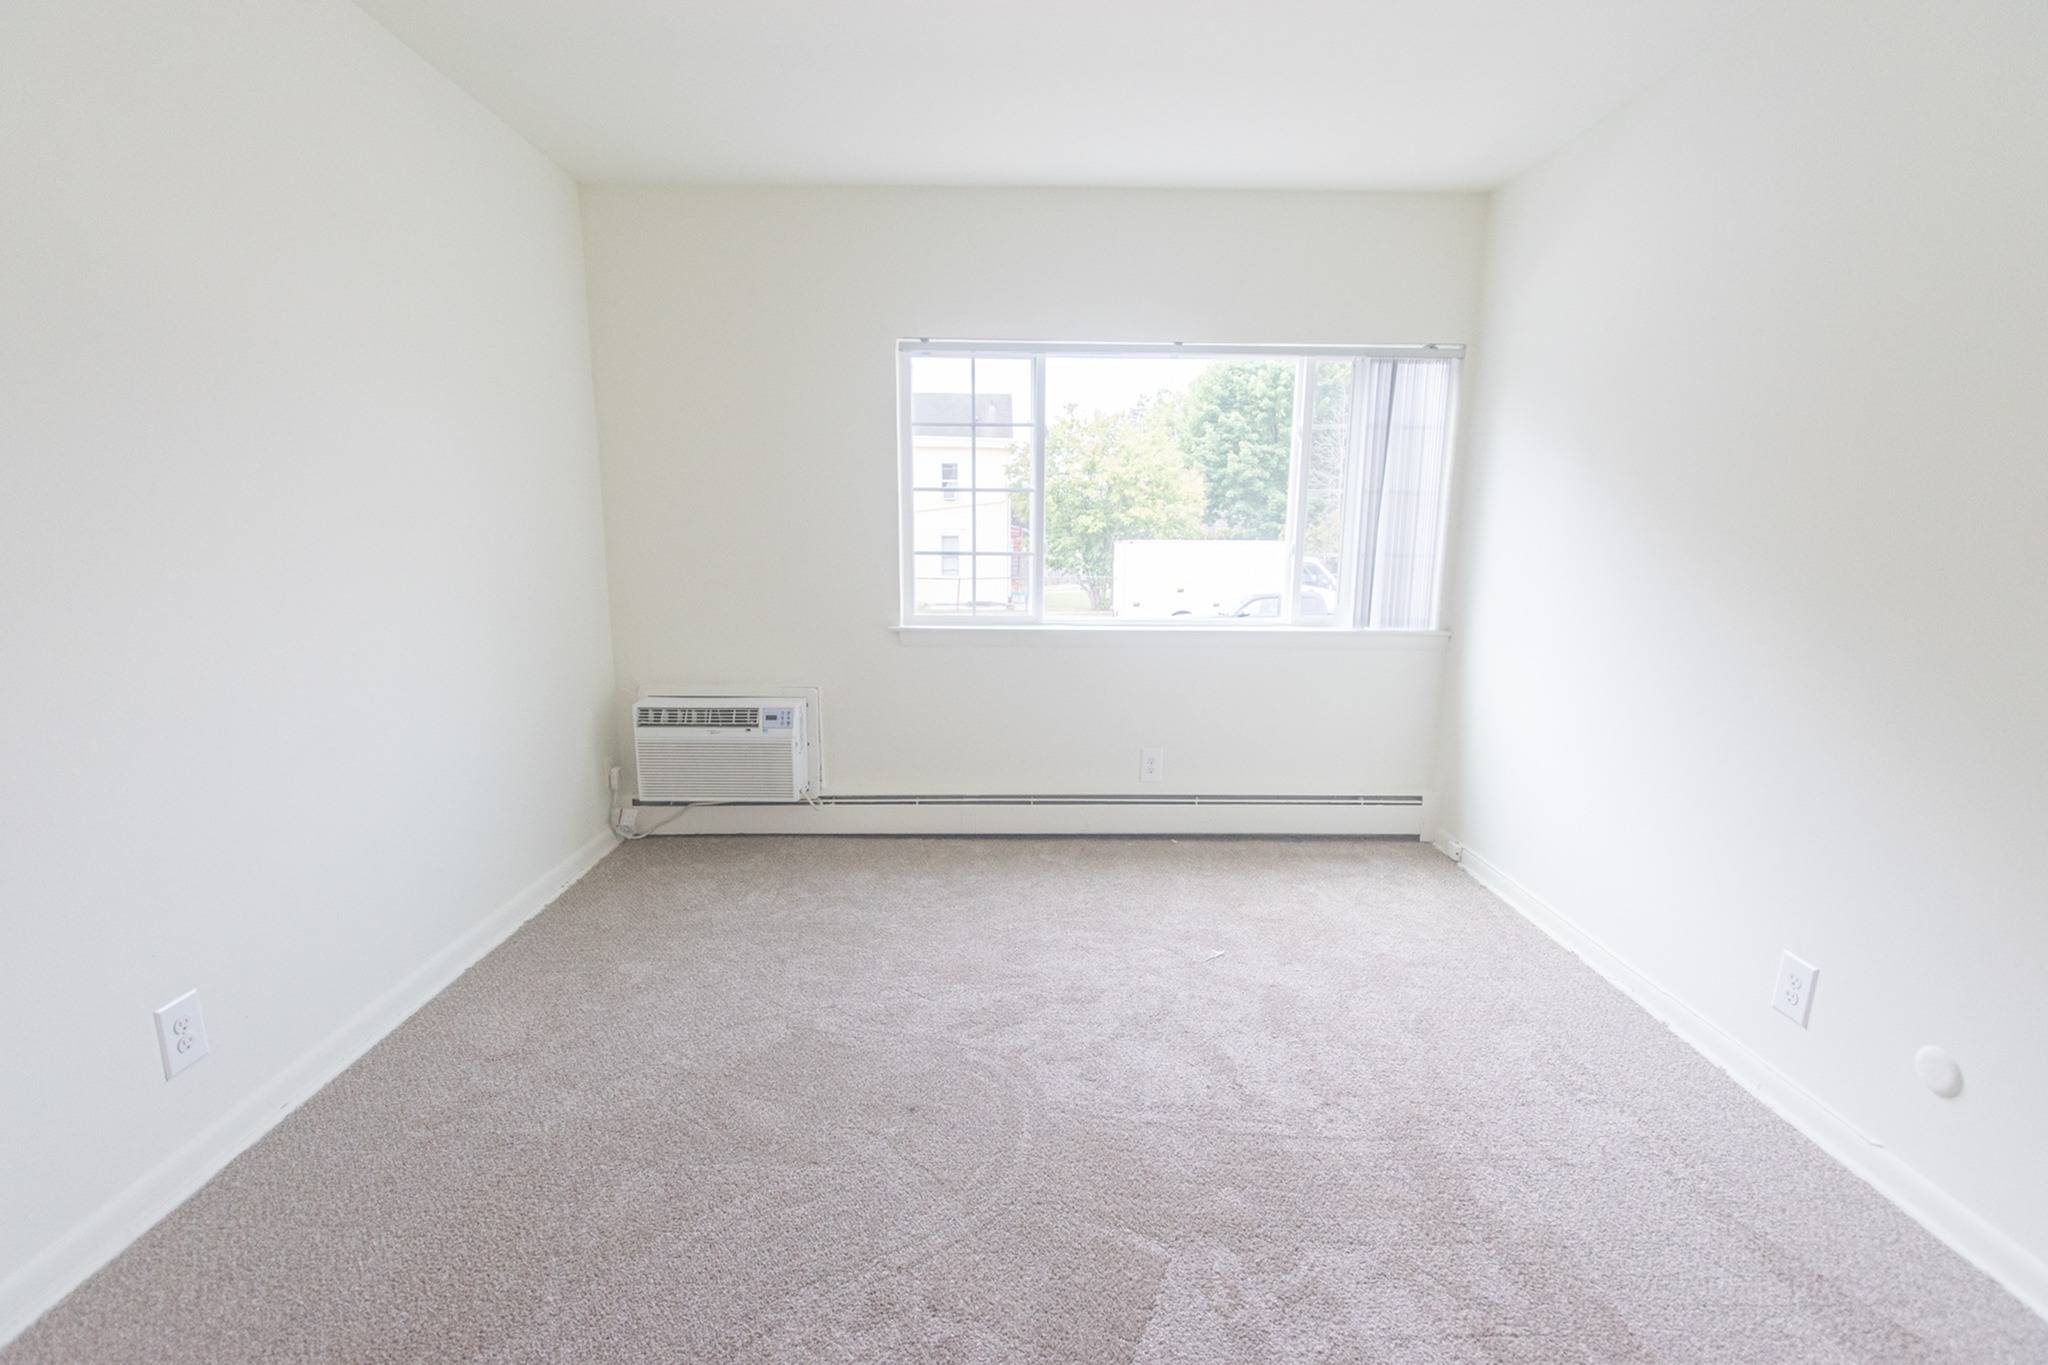 Carpeted bedroom with white walls and a large window.